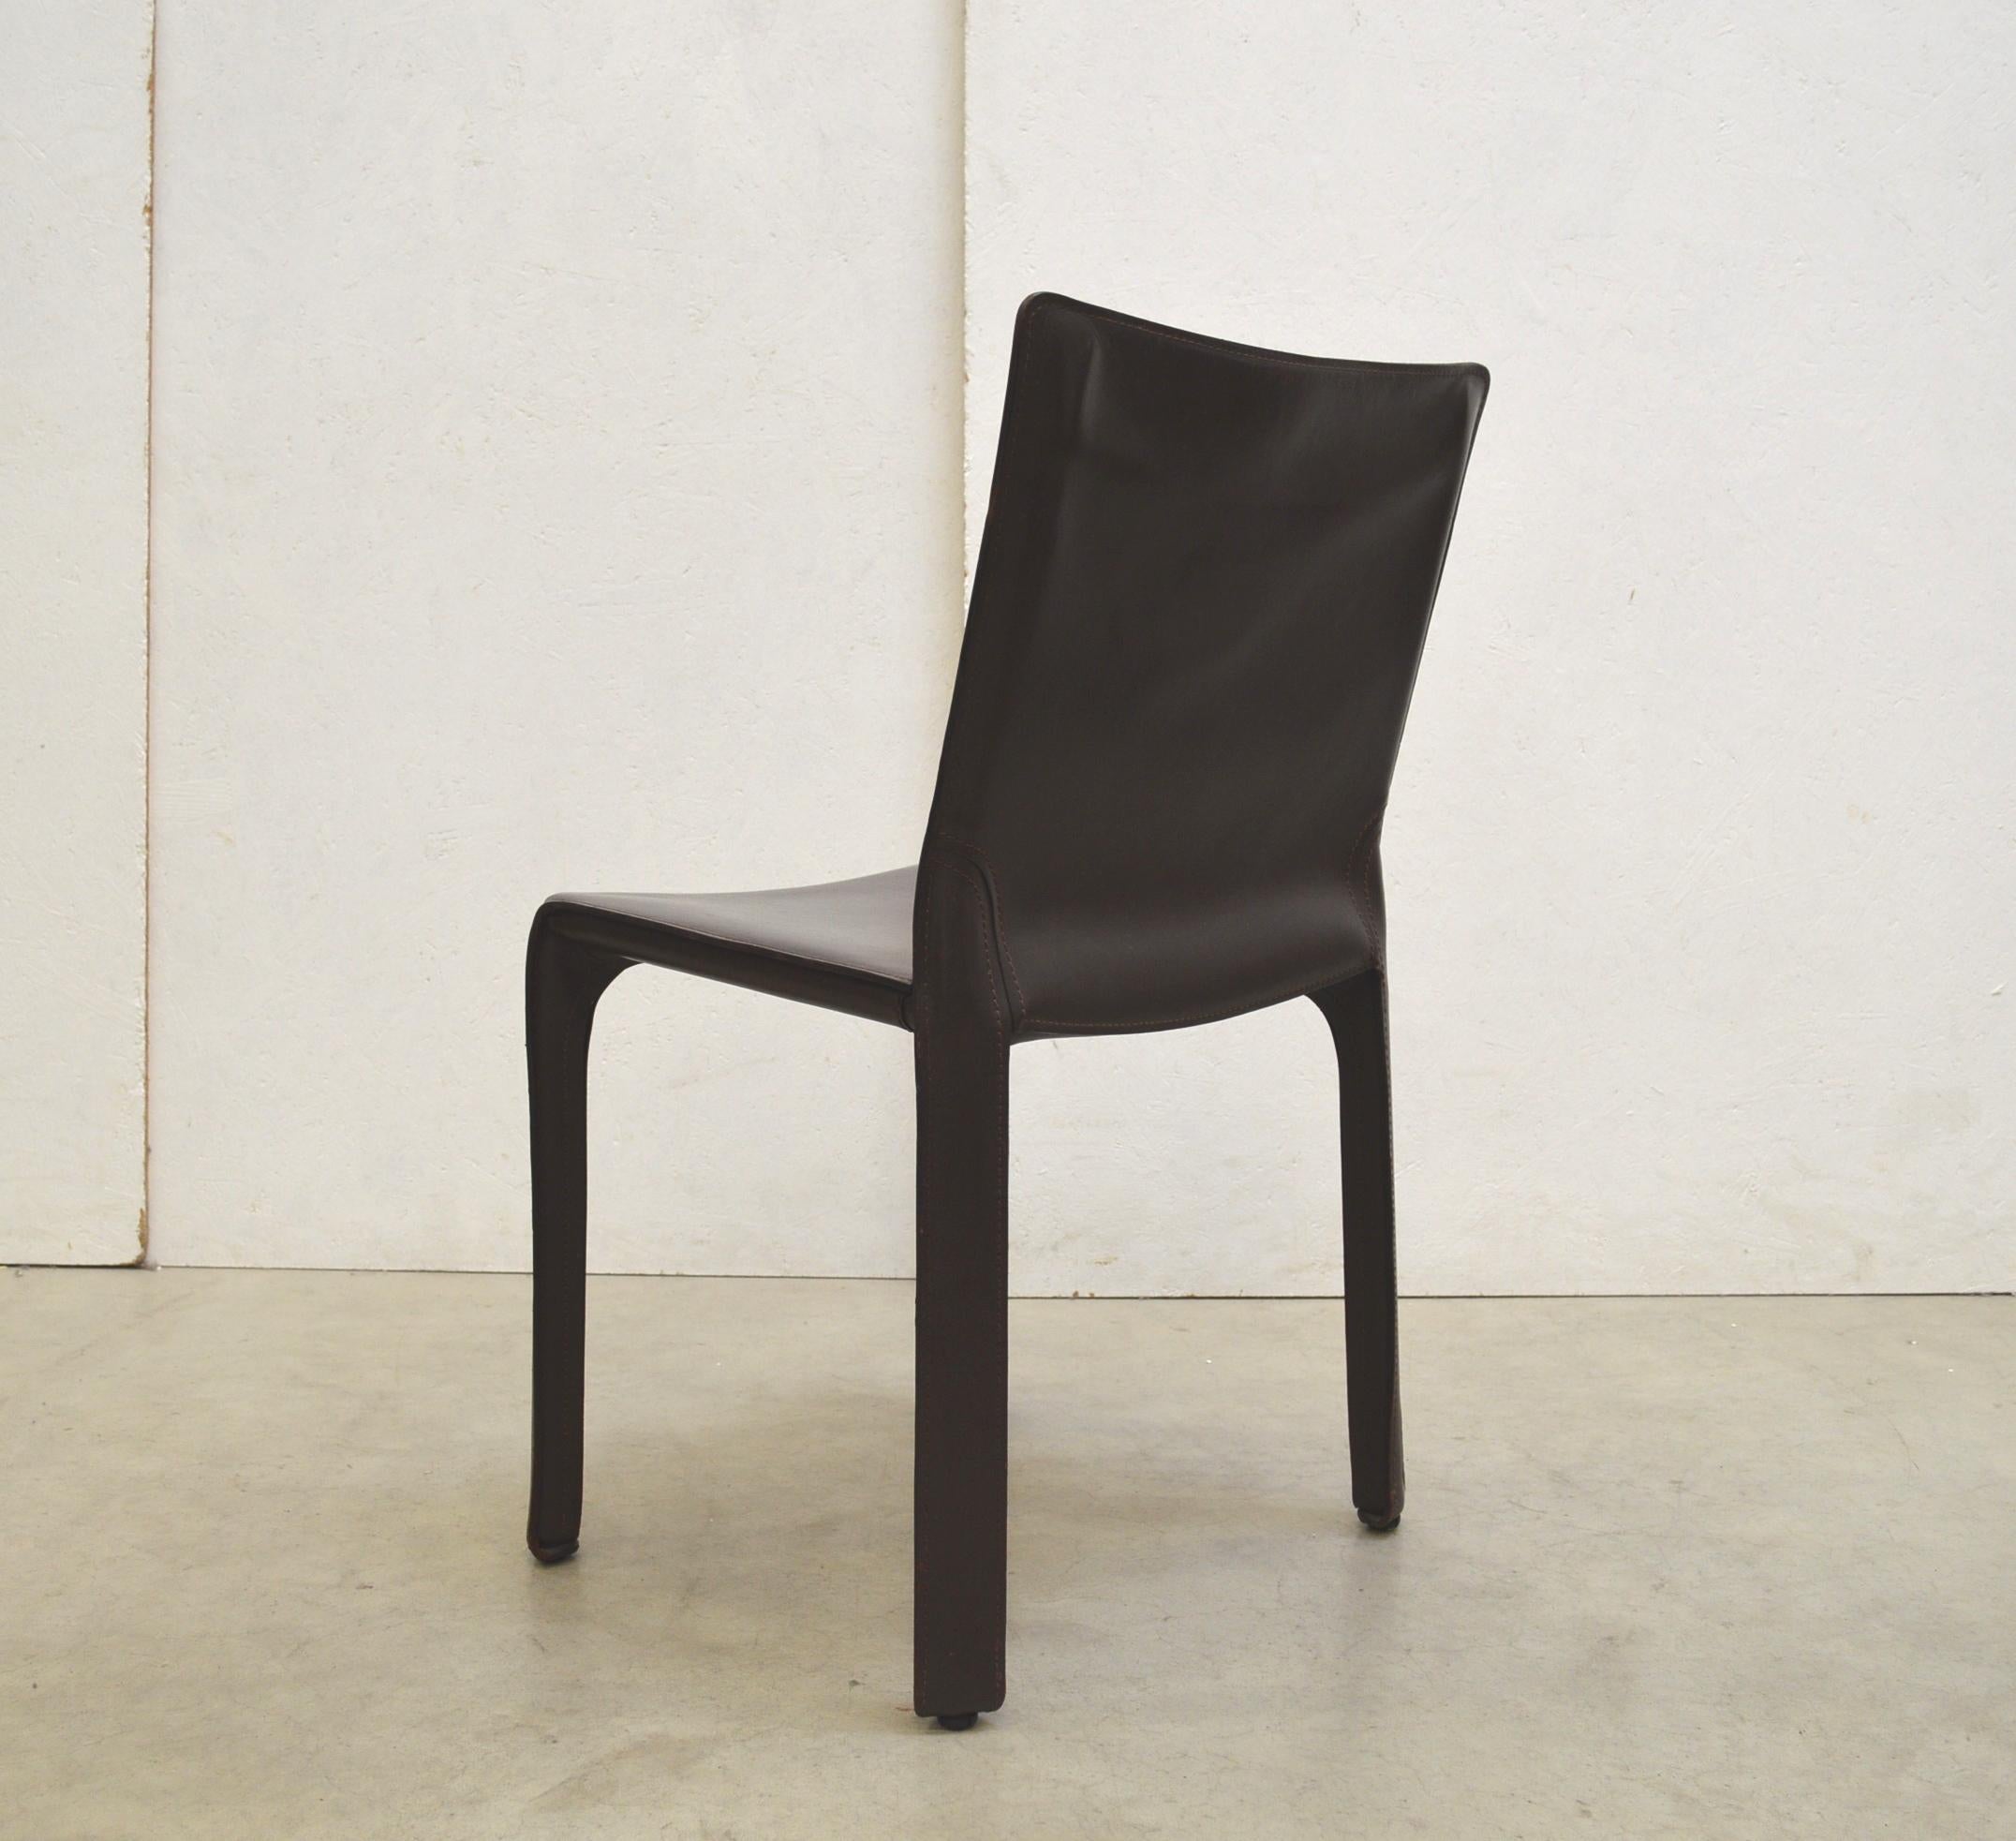 Steel Set of 6 Cab Chair 412 by Mario Bellini for Cassina Chocolate Brown Leather